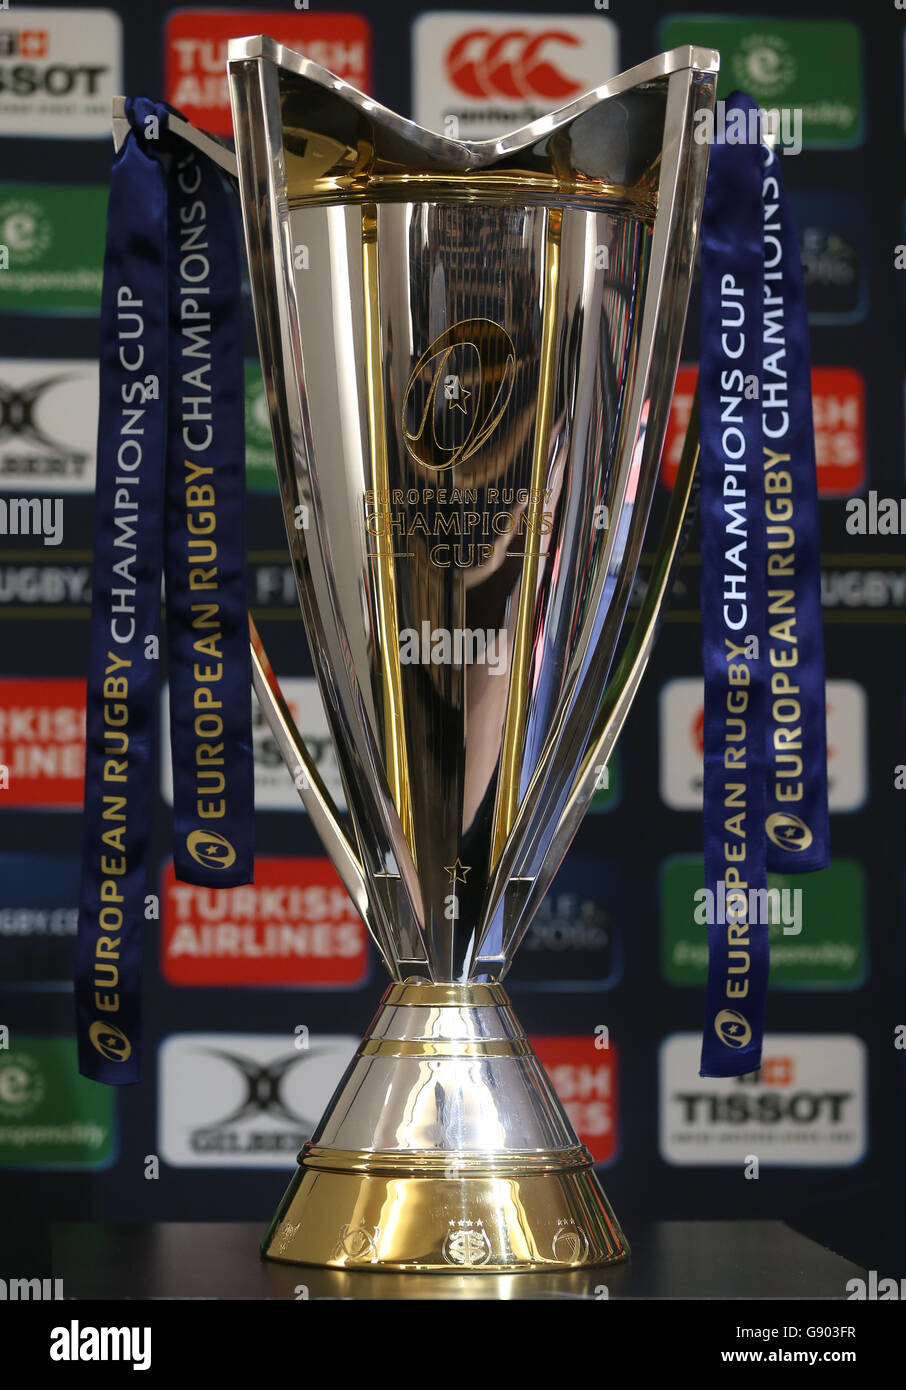 The Champions Cup Trophy prior to the European Rugby Champions Cup Final, at the Grand Stade de Lyon. PRESS ASSOCIAION Photo. Picture date: Friday May 13, 2016. See PA story RUGBYU Saracens. Photo credit should read: Adam Davy/PA Wire. RESTRICTIONS: , No commercial use without prior permission, please contact PA Images for further information: Tel: +44 (0) 115 8447447. Stock Photo